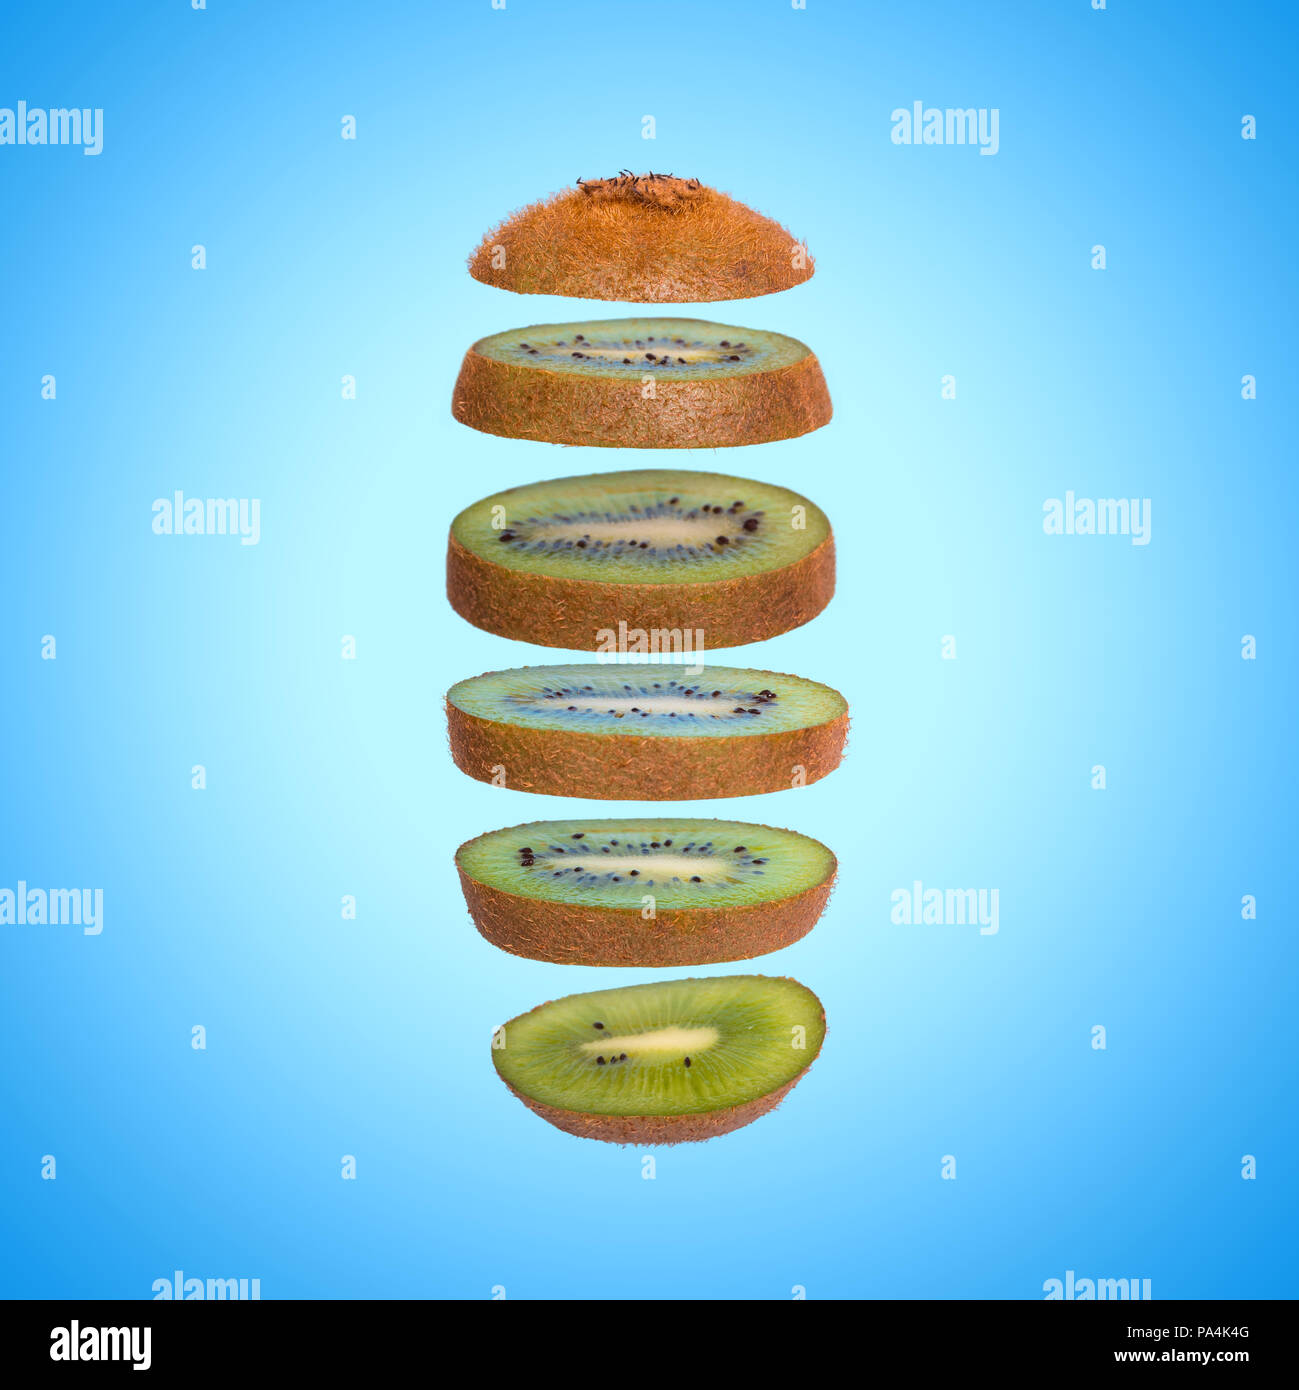 Creative concept with flying kiwi. Sliced kiwi on blue background. Levity fruit floating in the air Stock Photo